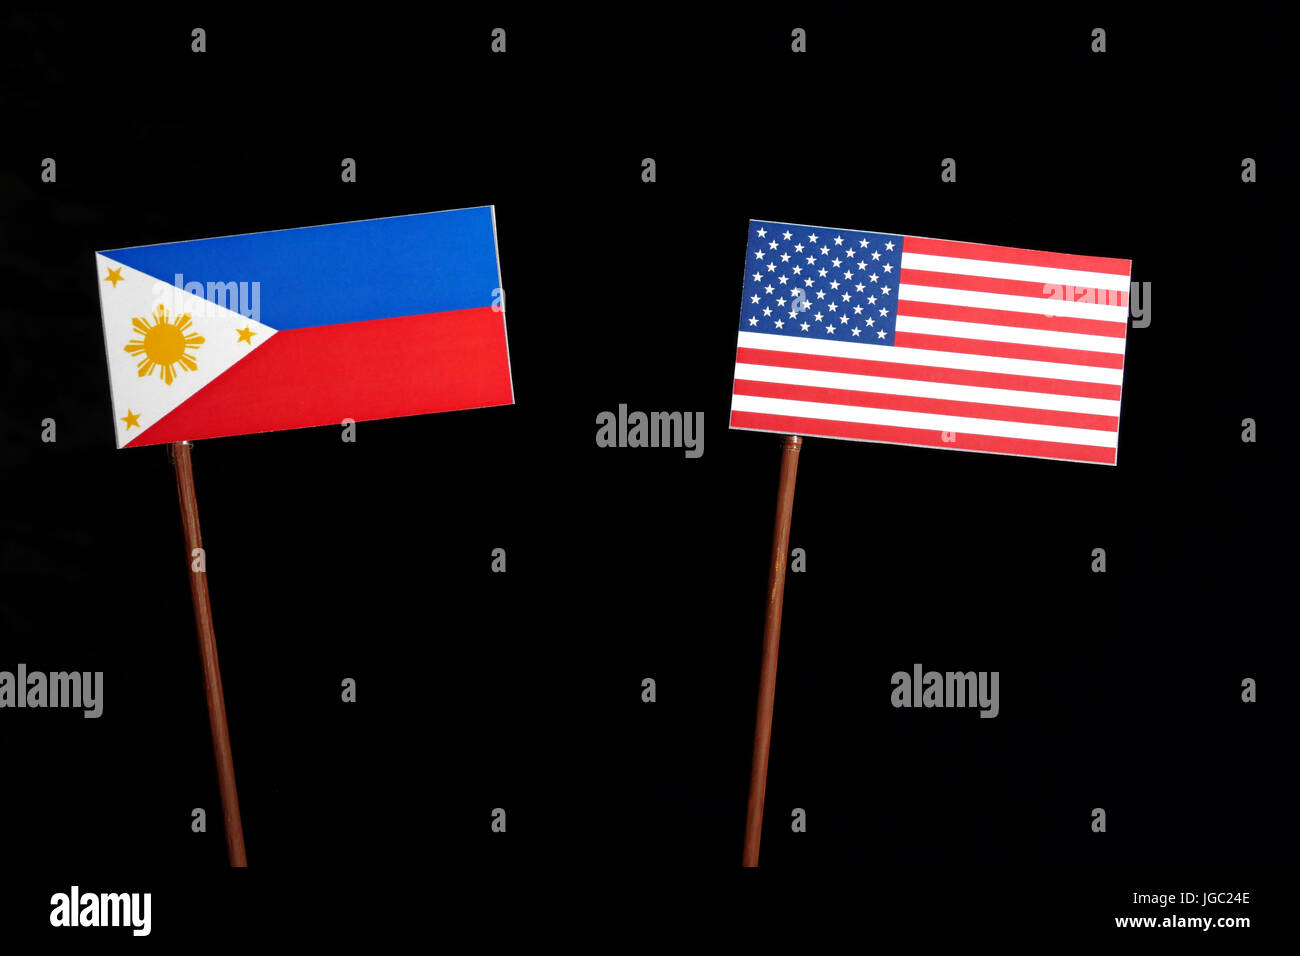 Philippines flag with USA flag isolated on black background Stock ...